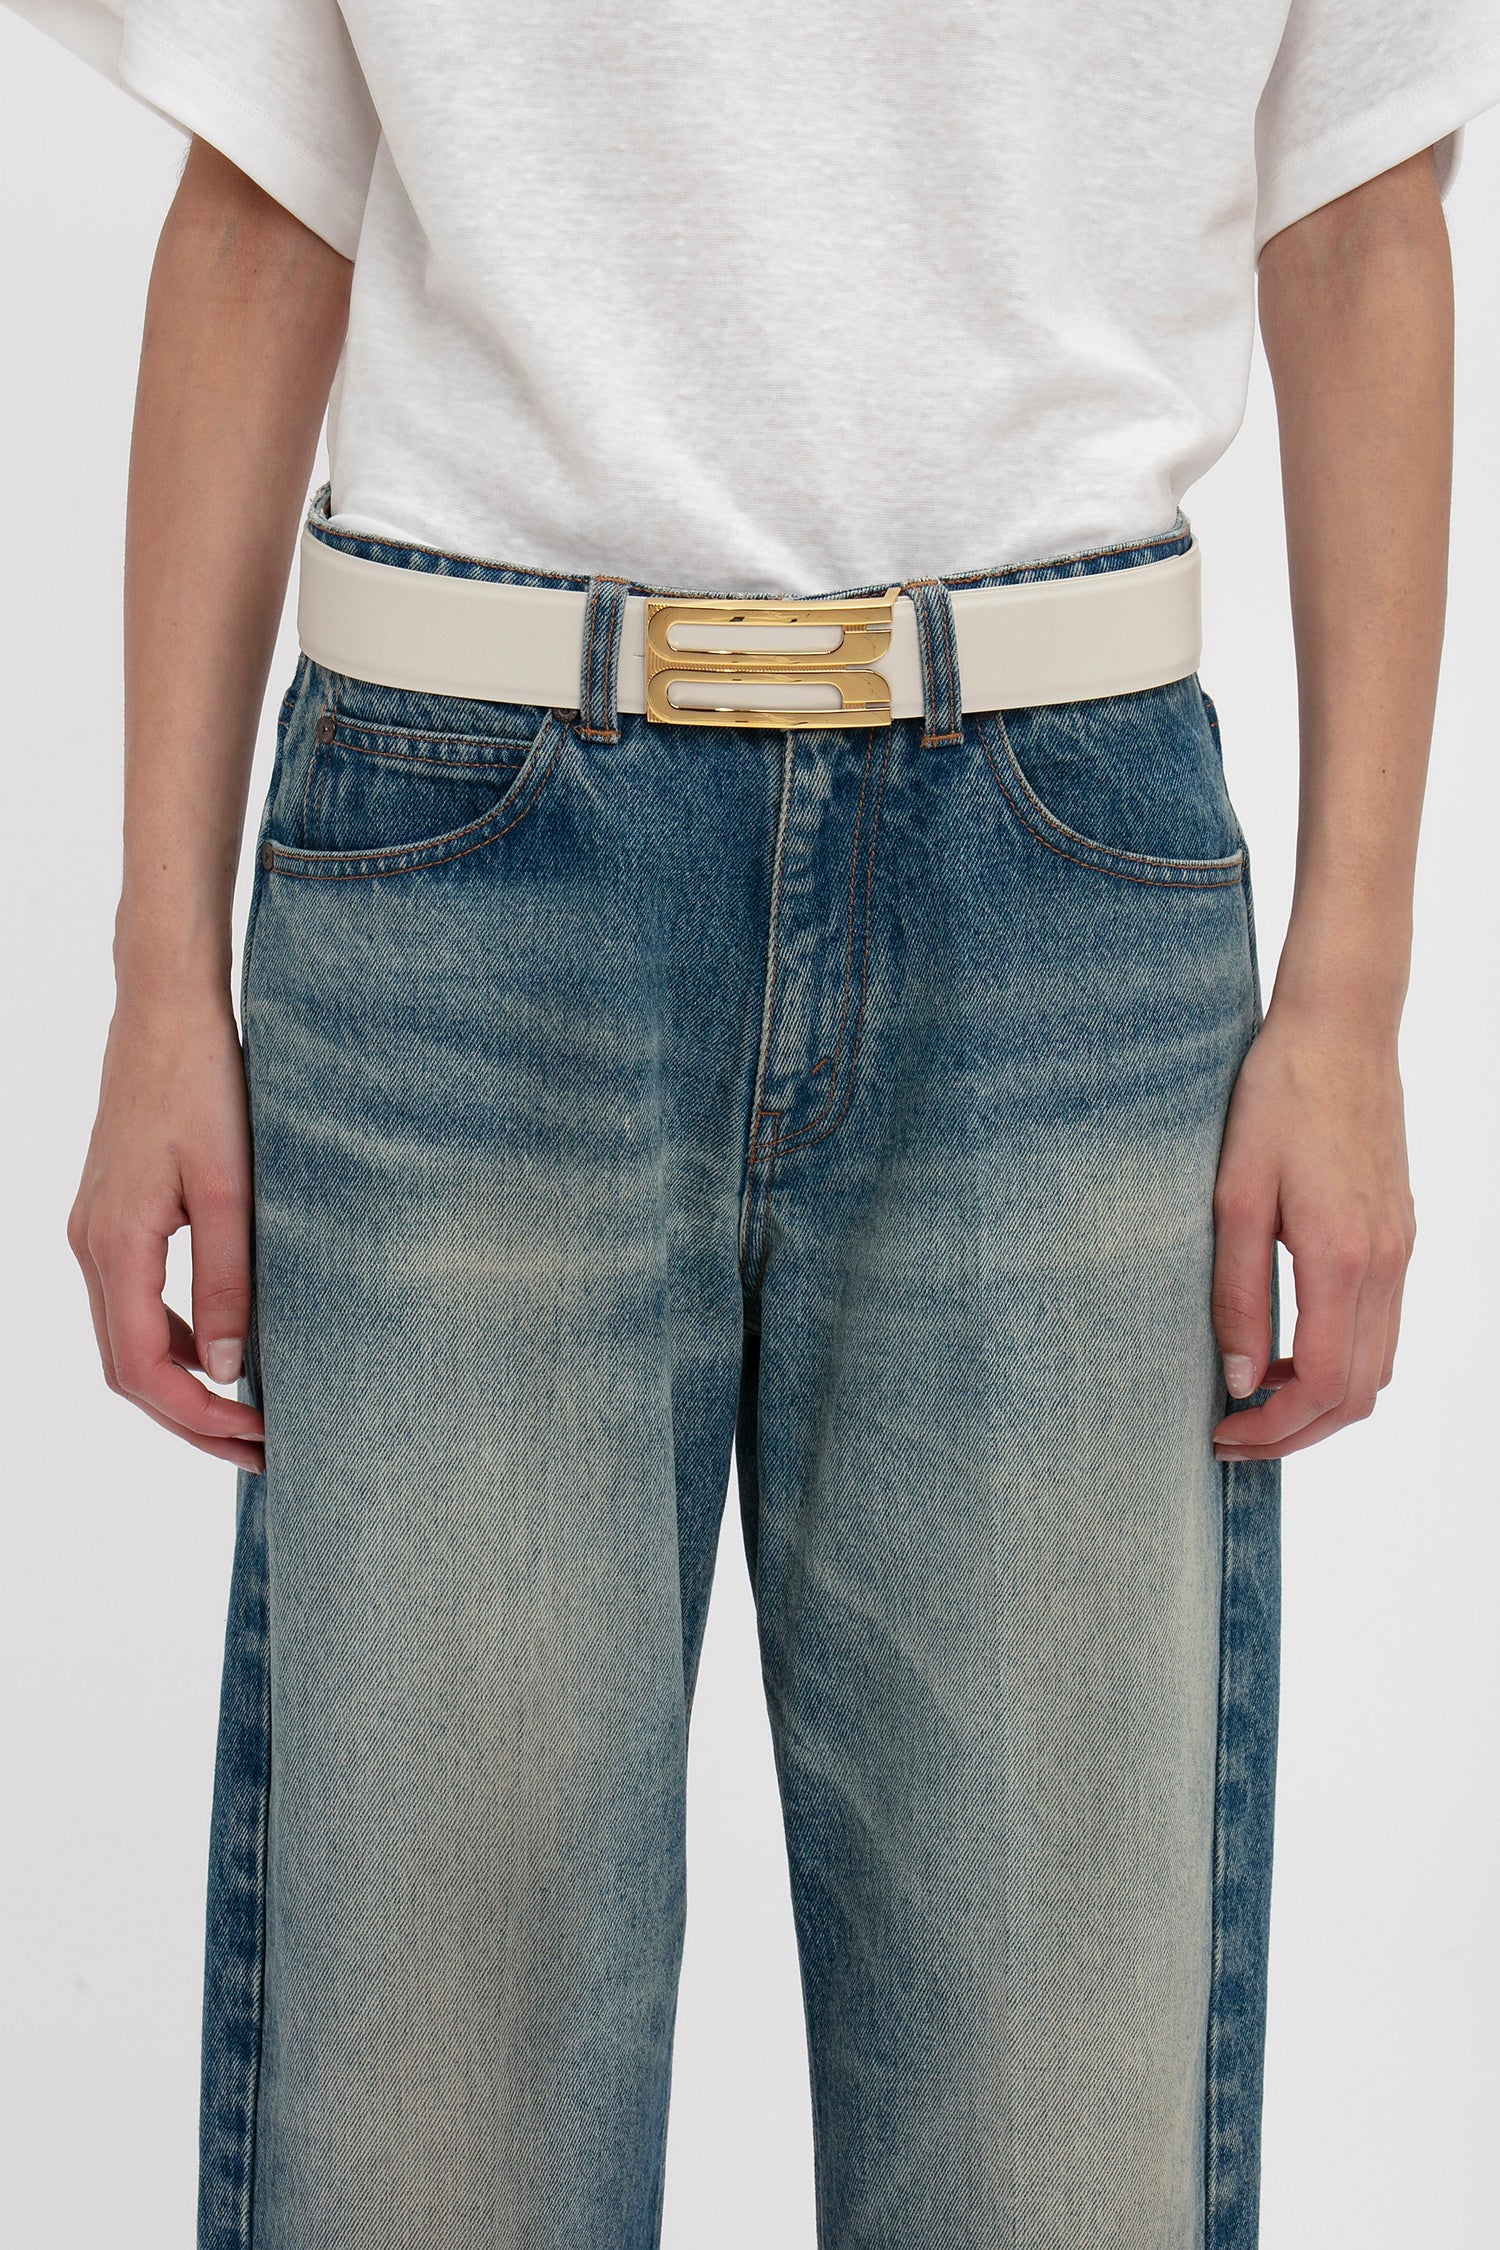 A person is wearing a white t-shirt tucked into faded blue jeans, secured with a Victoria Beckham Jumbo Frame Belt In Latte Leather featuring gold hardware.